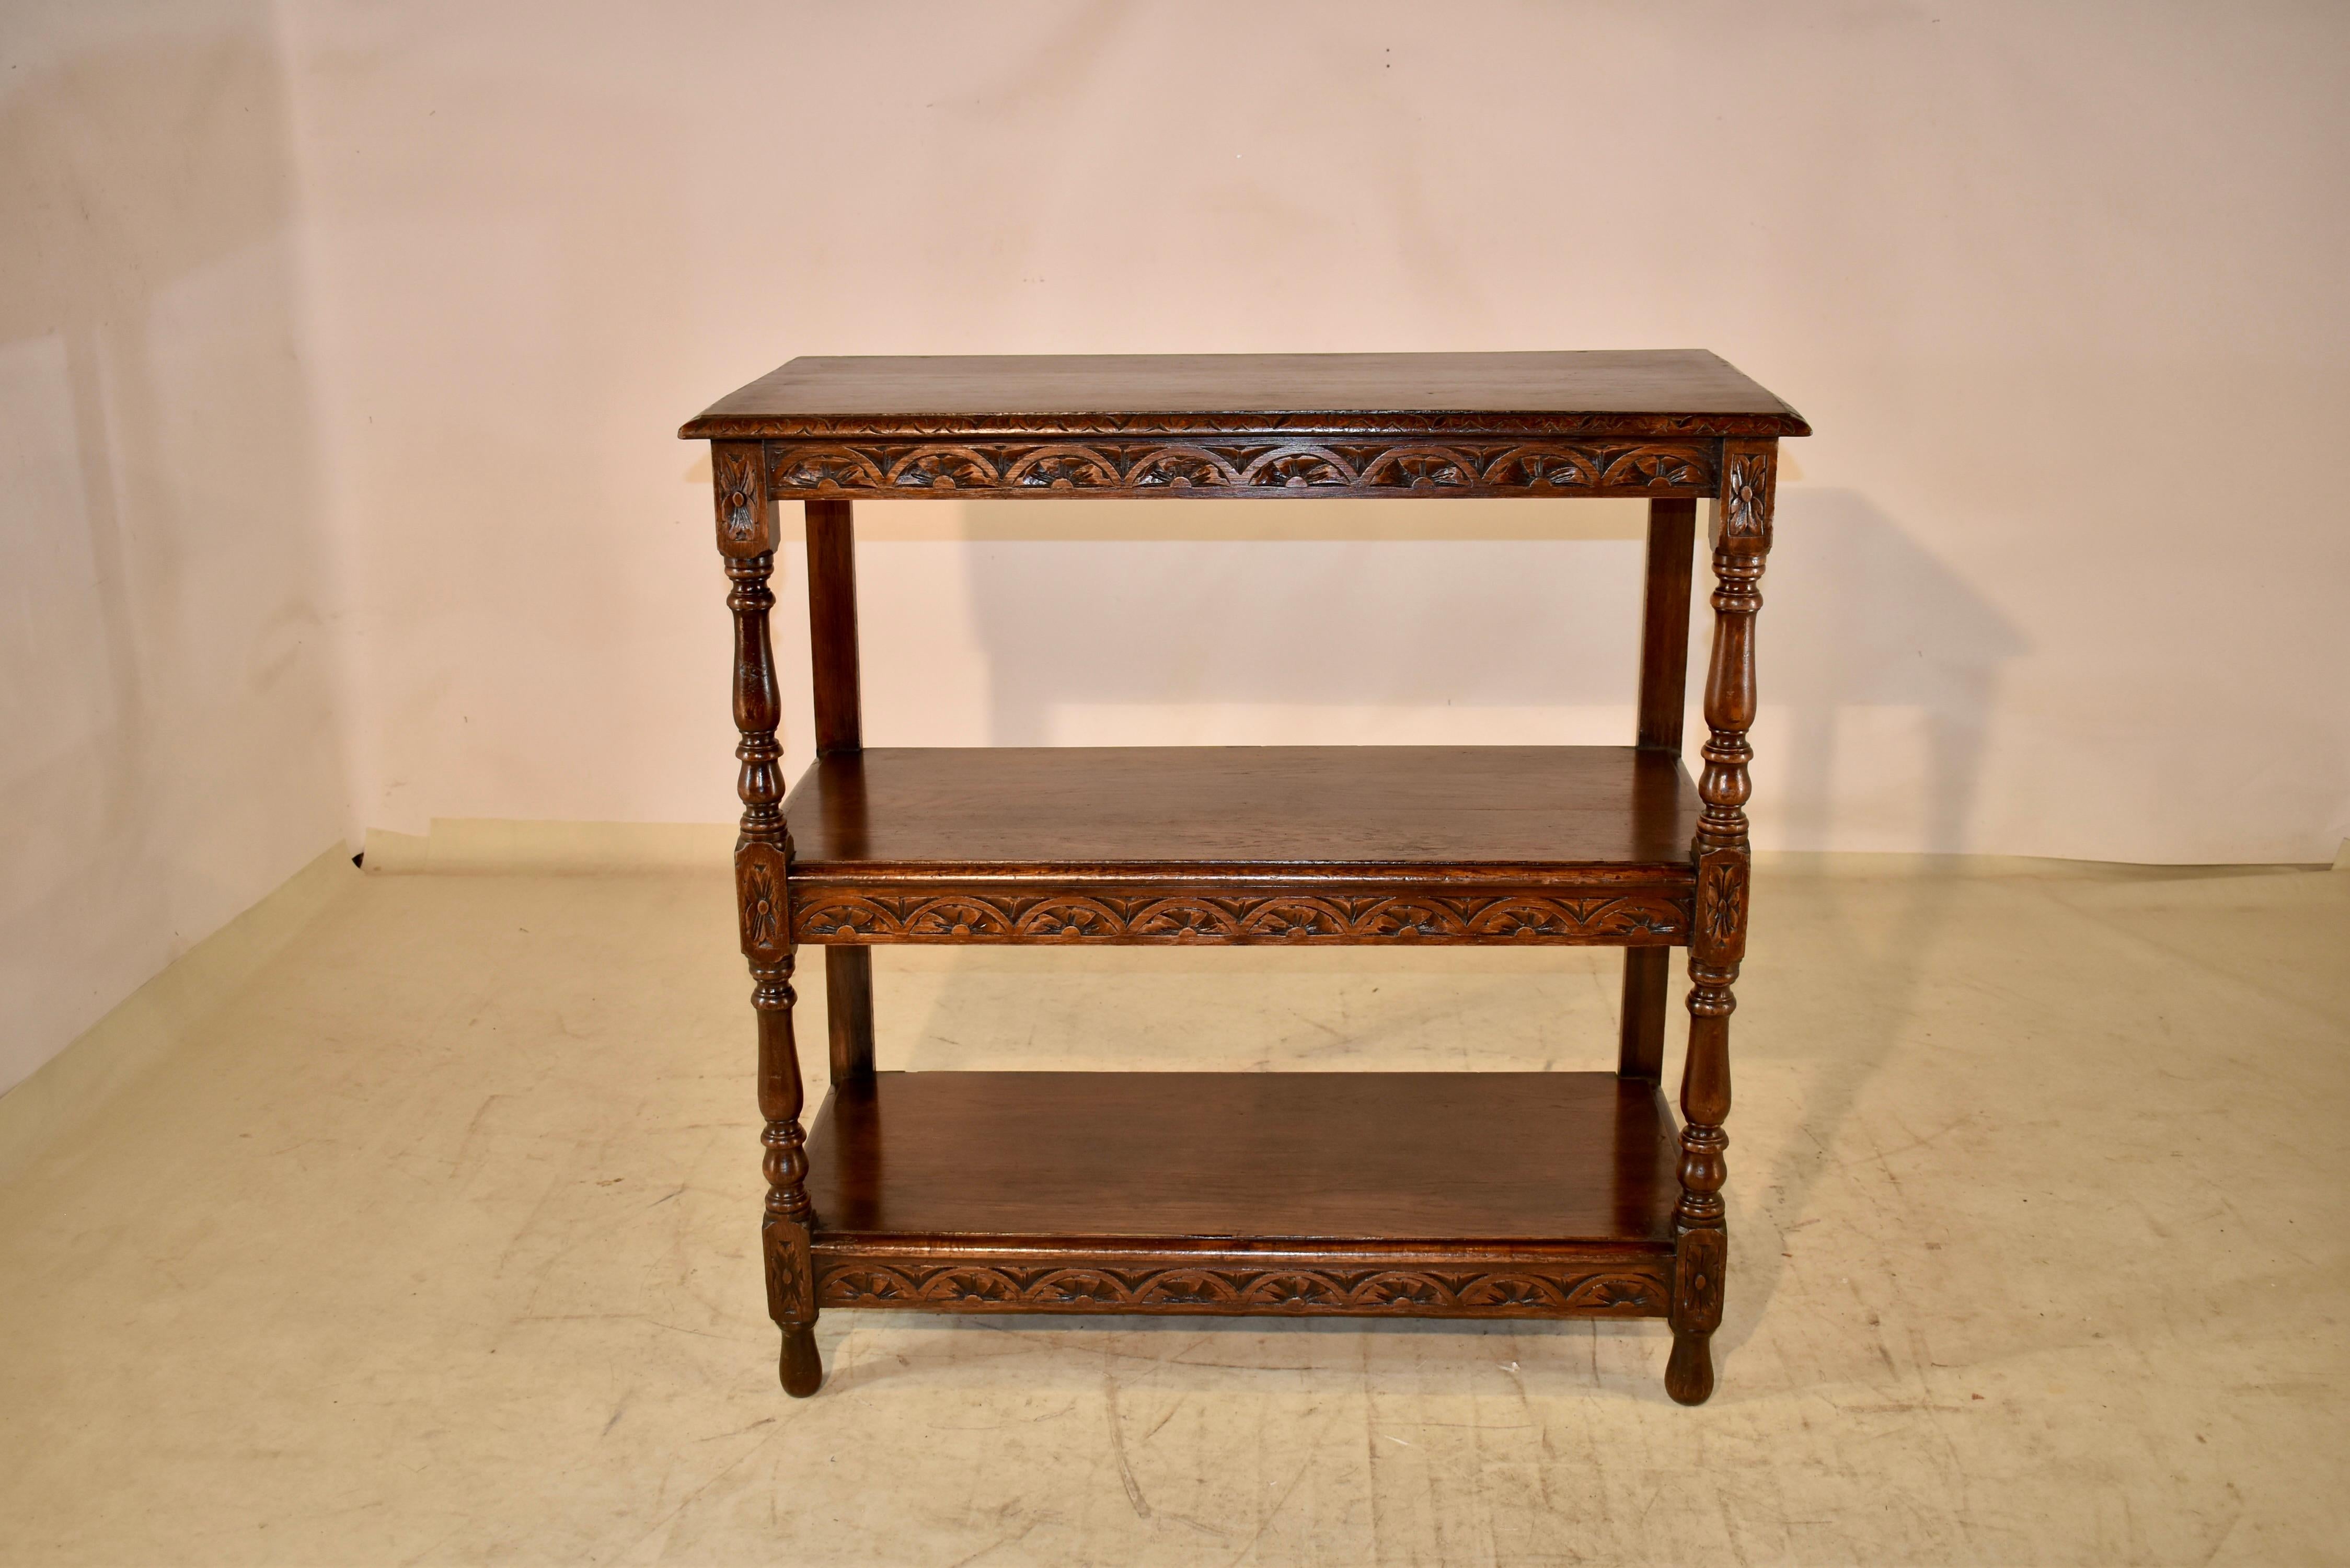 19th century carved oak shelf from England. The top has a beveled edge, following down to hand carve decorated shelf supports beneath the top and two lower shelves. The shelves are separated by hand turned shelf supports in the front and simple legs